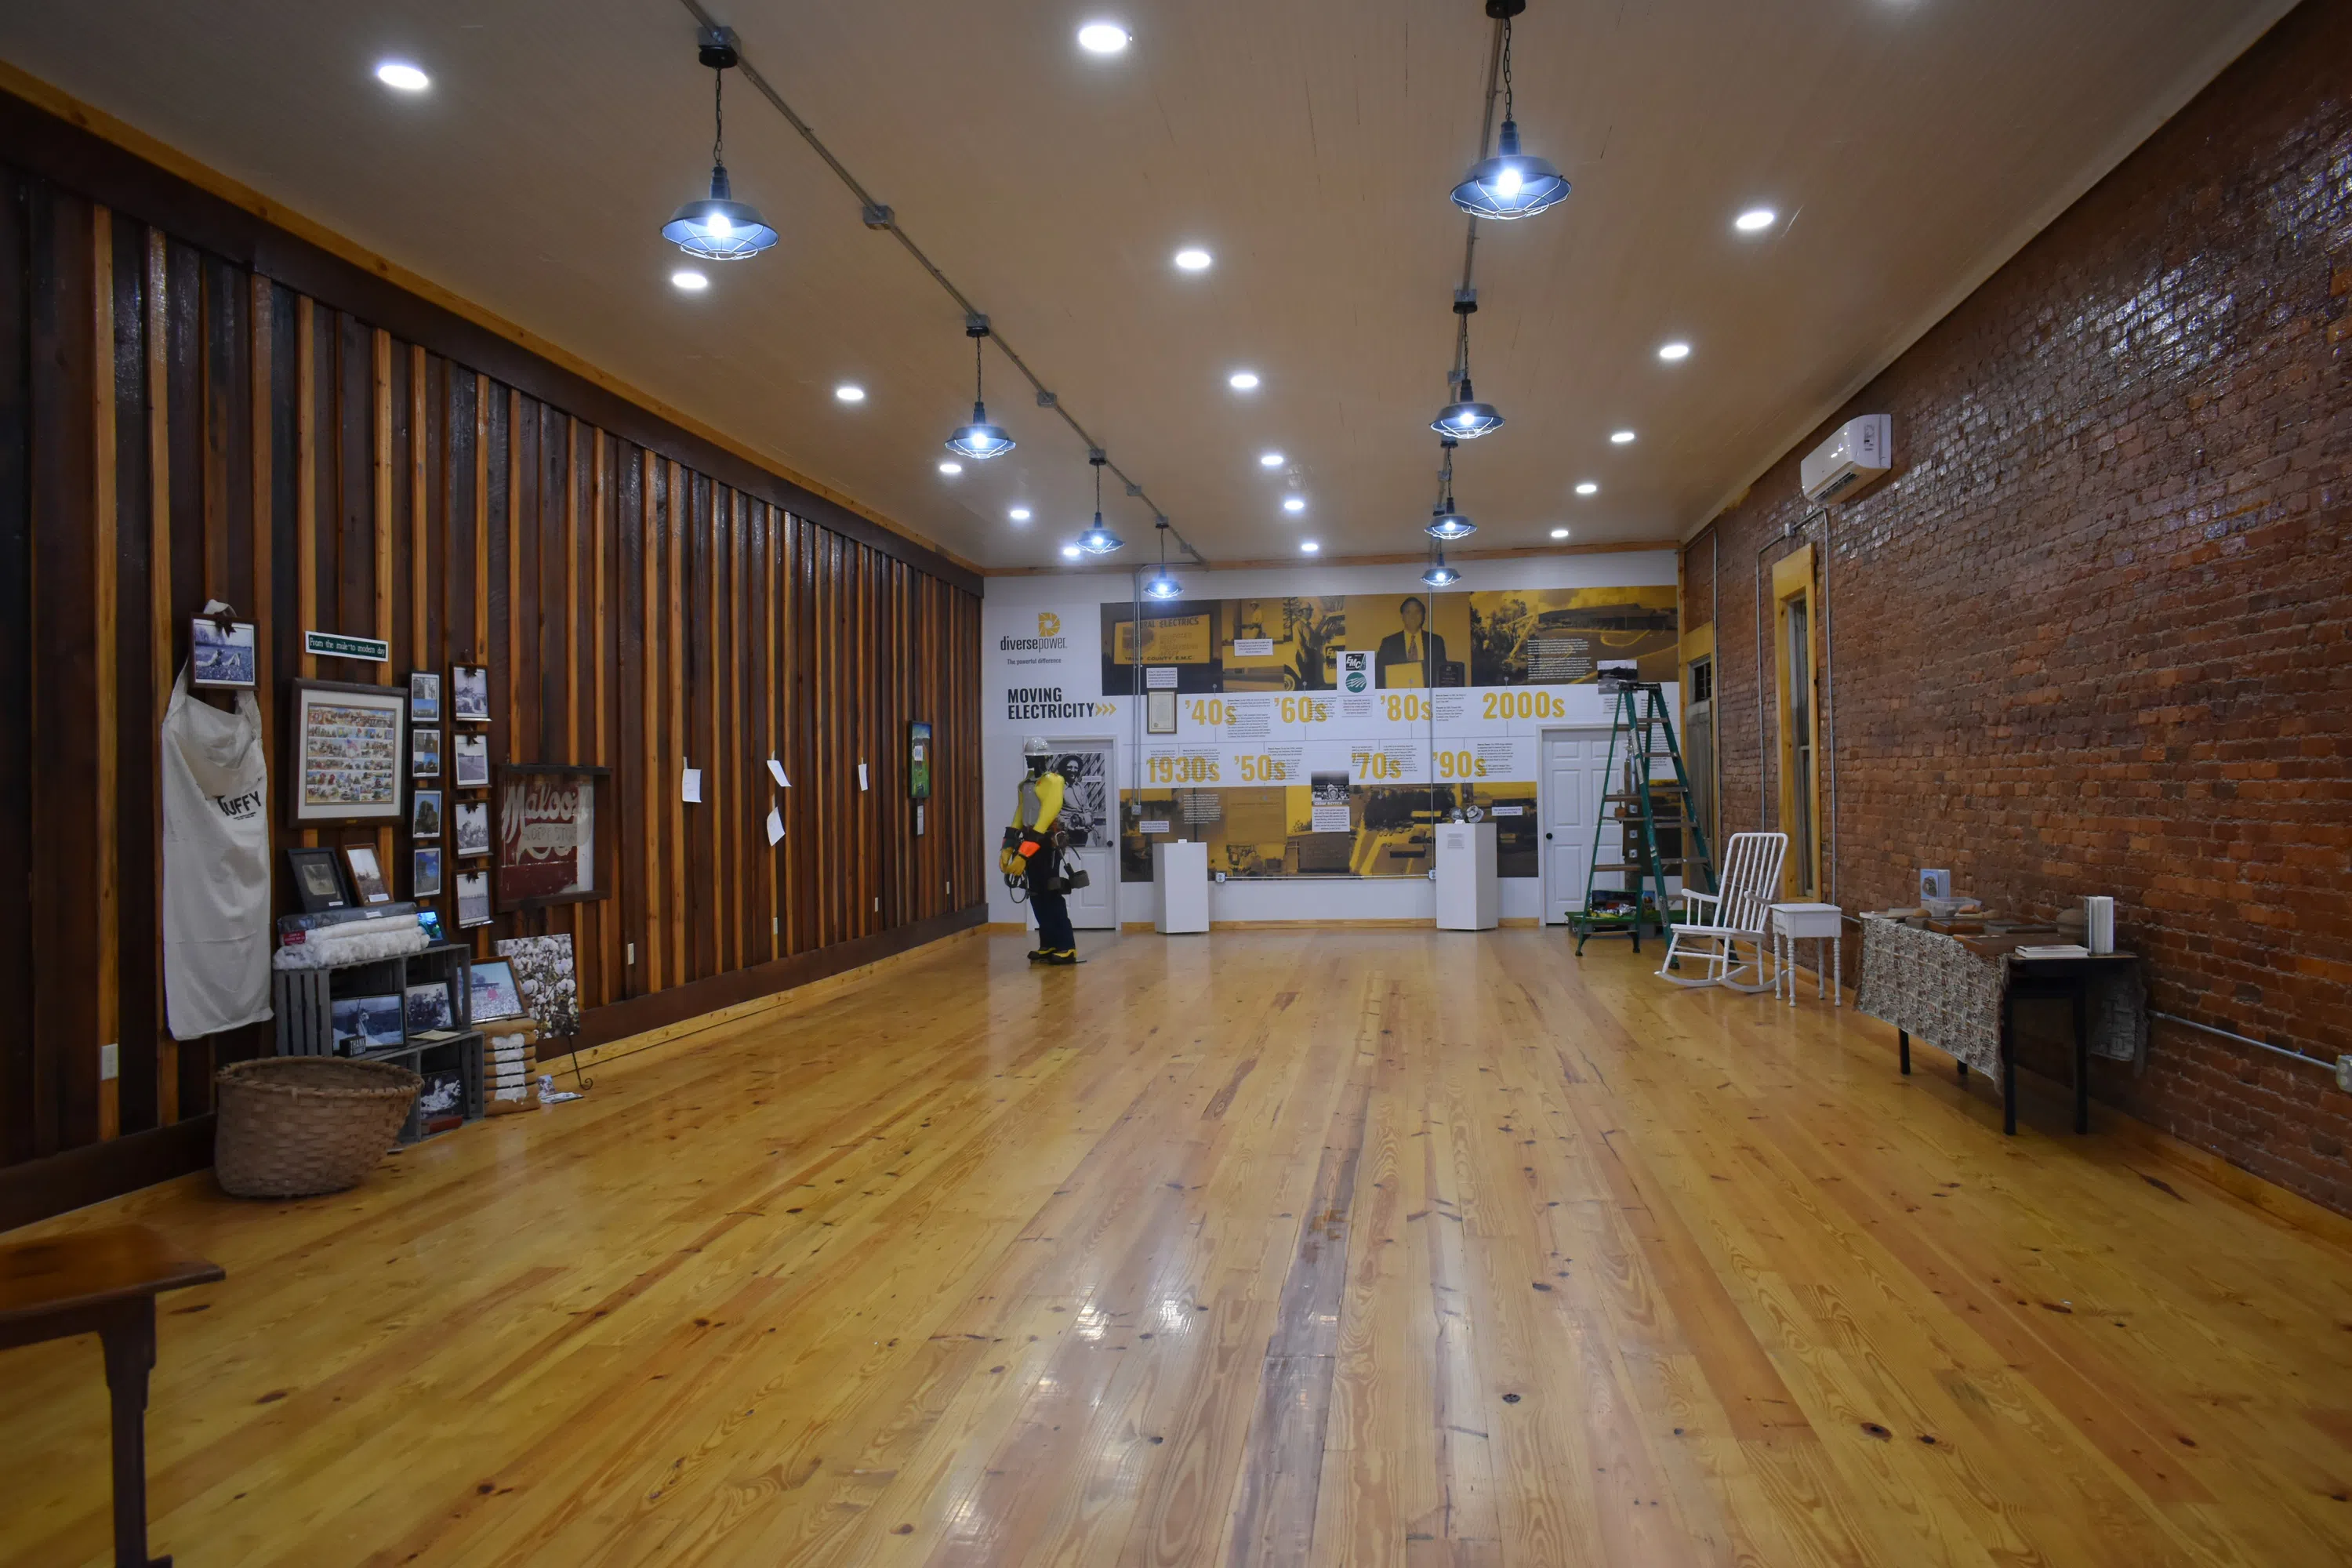 The image shows the interior of Maloof Building as it was recently used for a Smithsonian Exhibit.